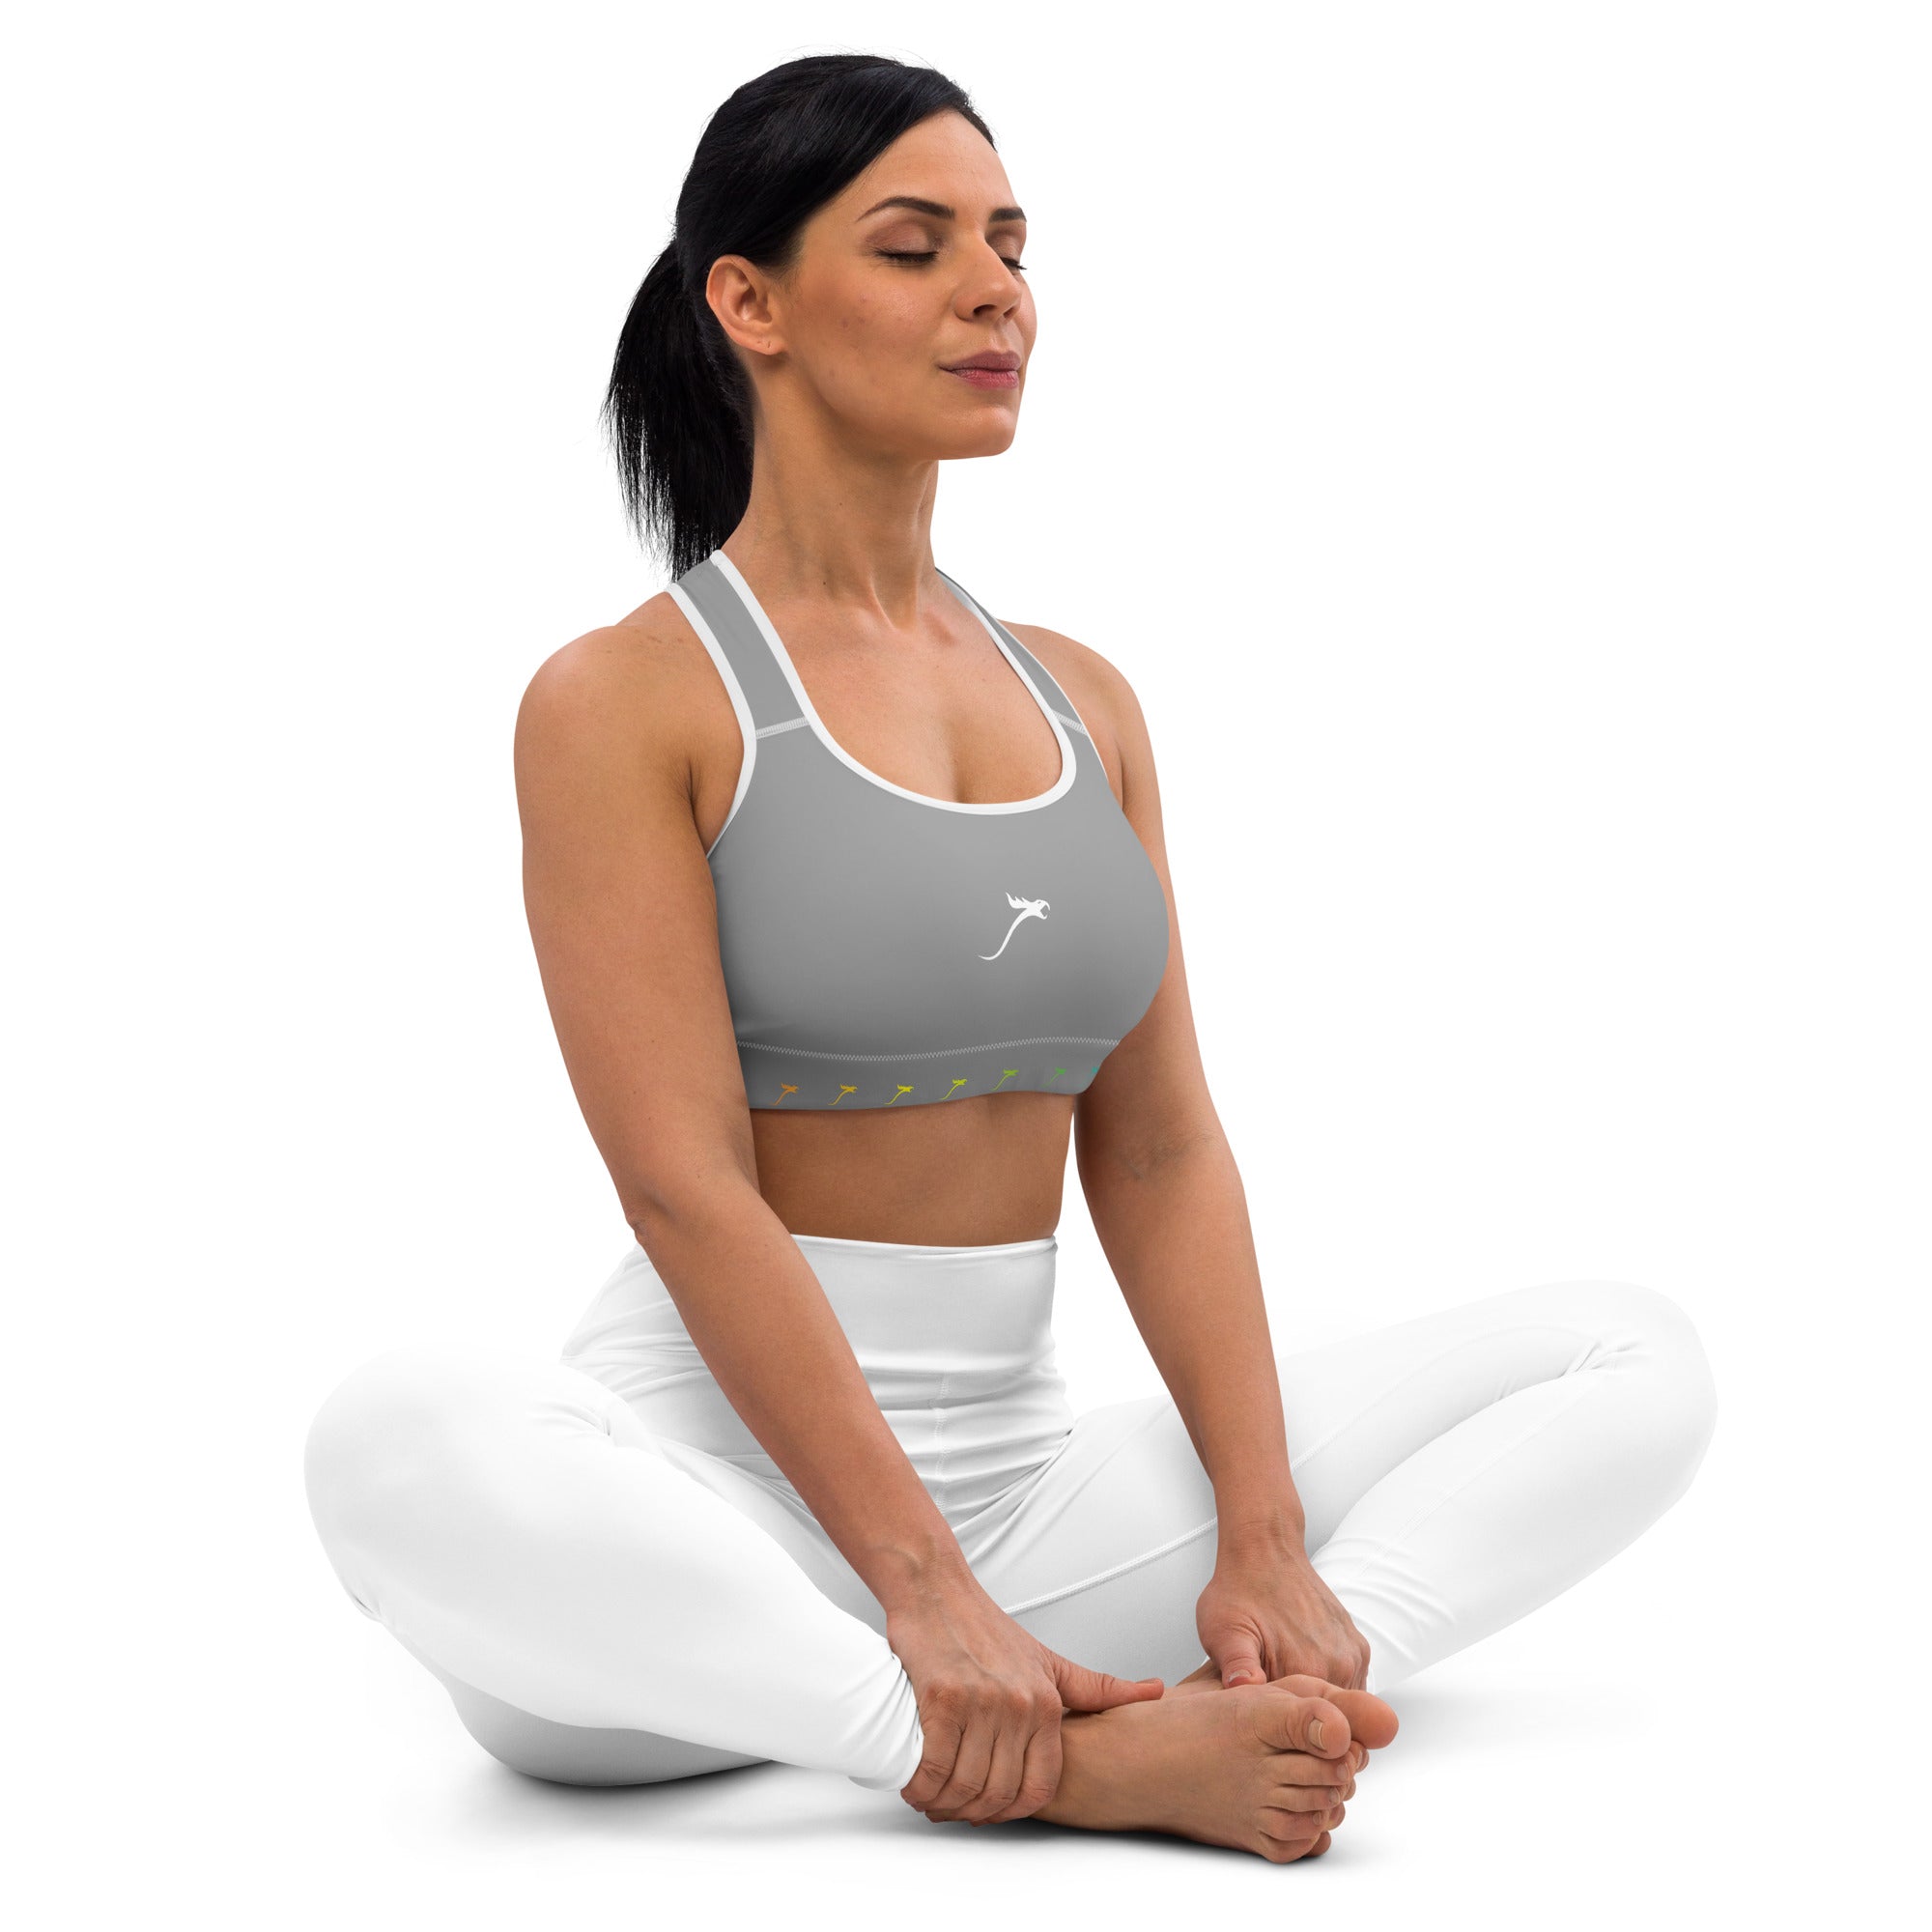 Buy Bitz Sports Bra - Sporty Racer Back Style Premium Organic Cotton  Stretch Fabric-Double Layered-White-XS (Medium, Lime Punch) at